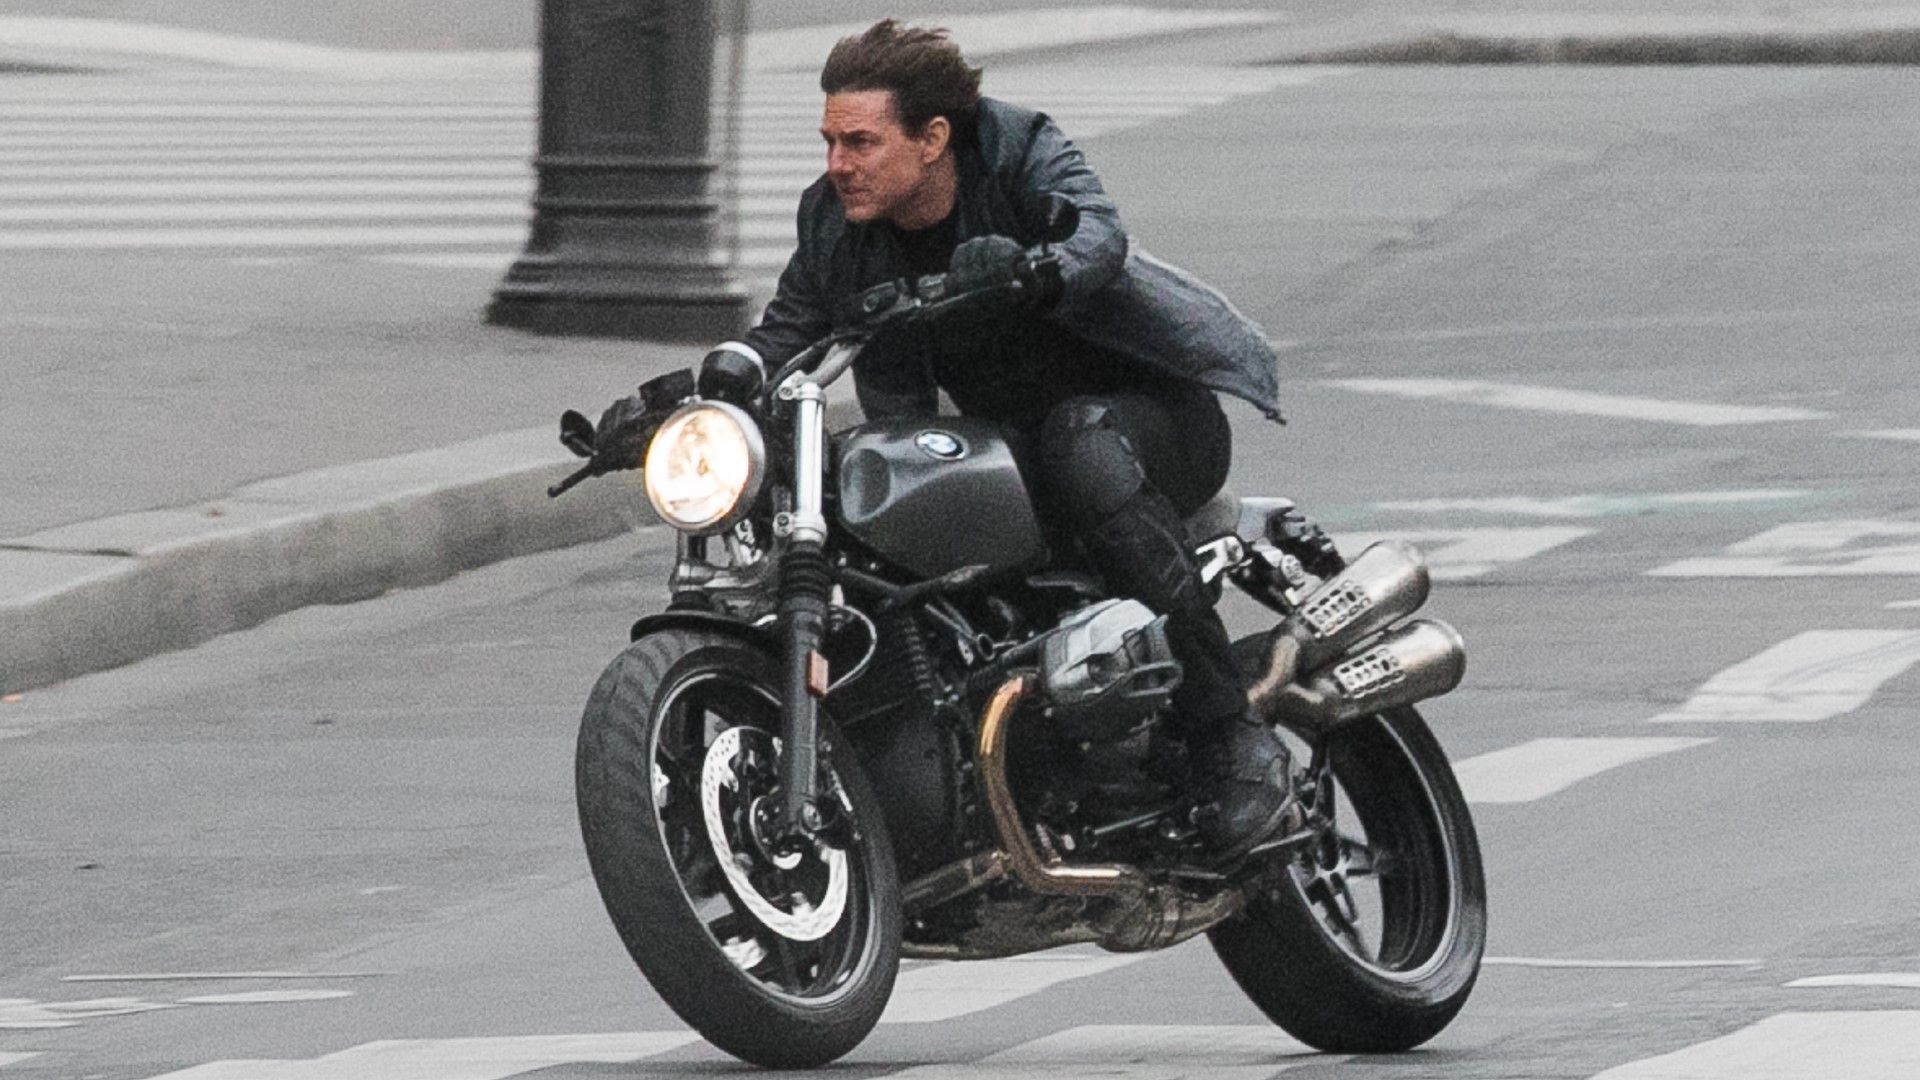 Tom Cruiser riding the BMW R nineT Scrambler In 'Mission Impossible: Fallout'